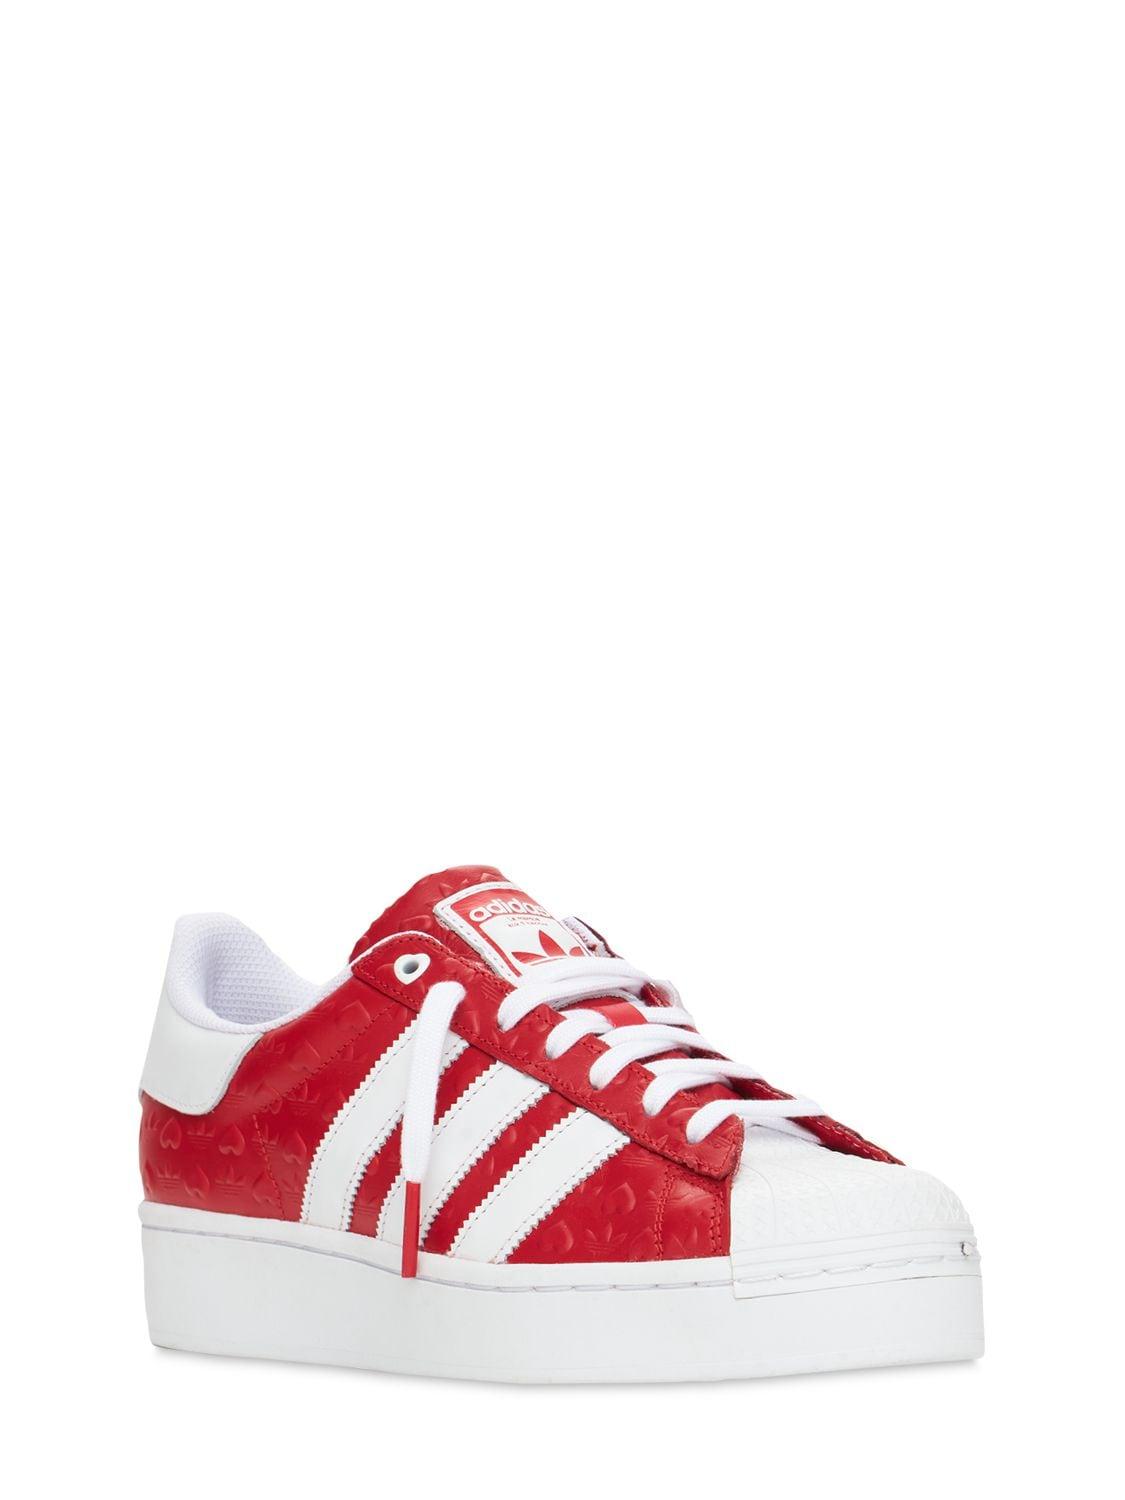 adidas Originals Leather Valentines Superstar Bold Sneakers in 